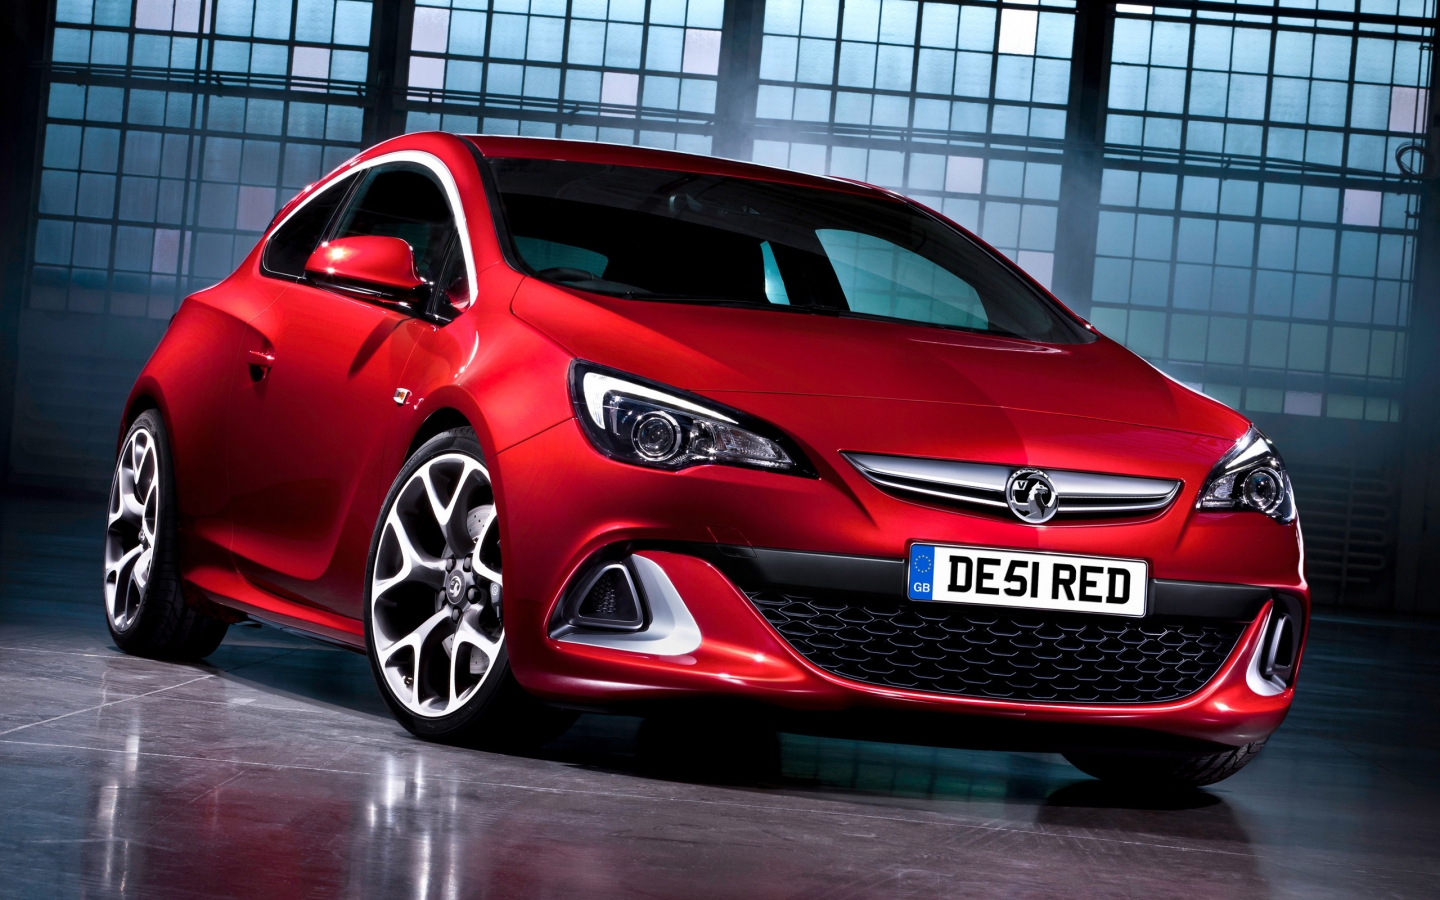 2012 Vauxhall Astra GTC for 1440 x 900 widescreen resolution